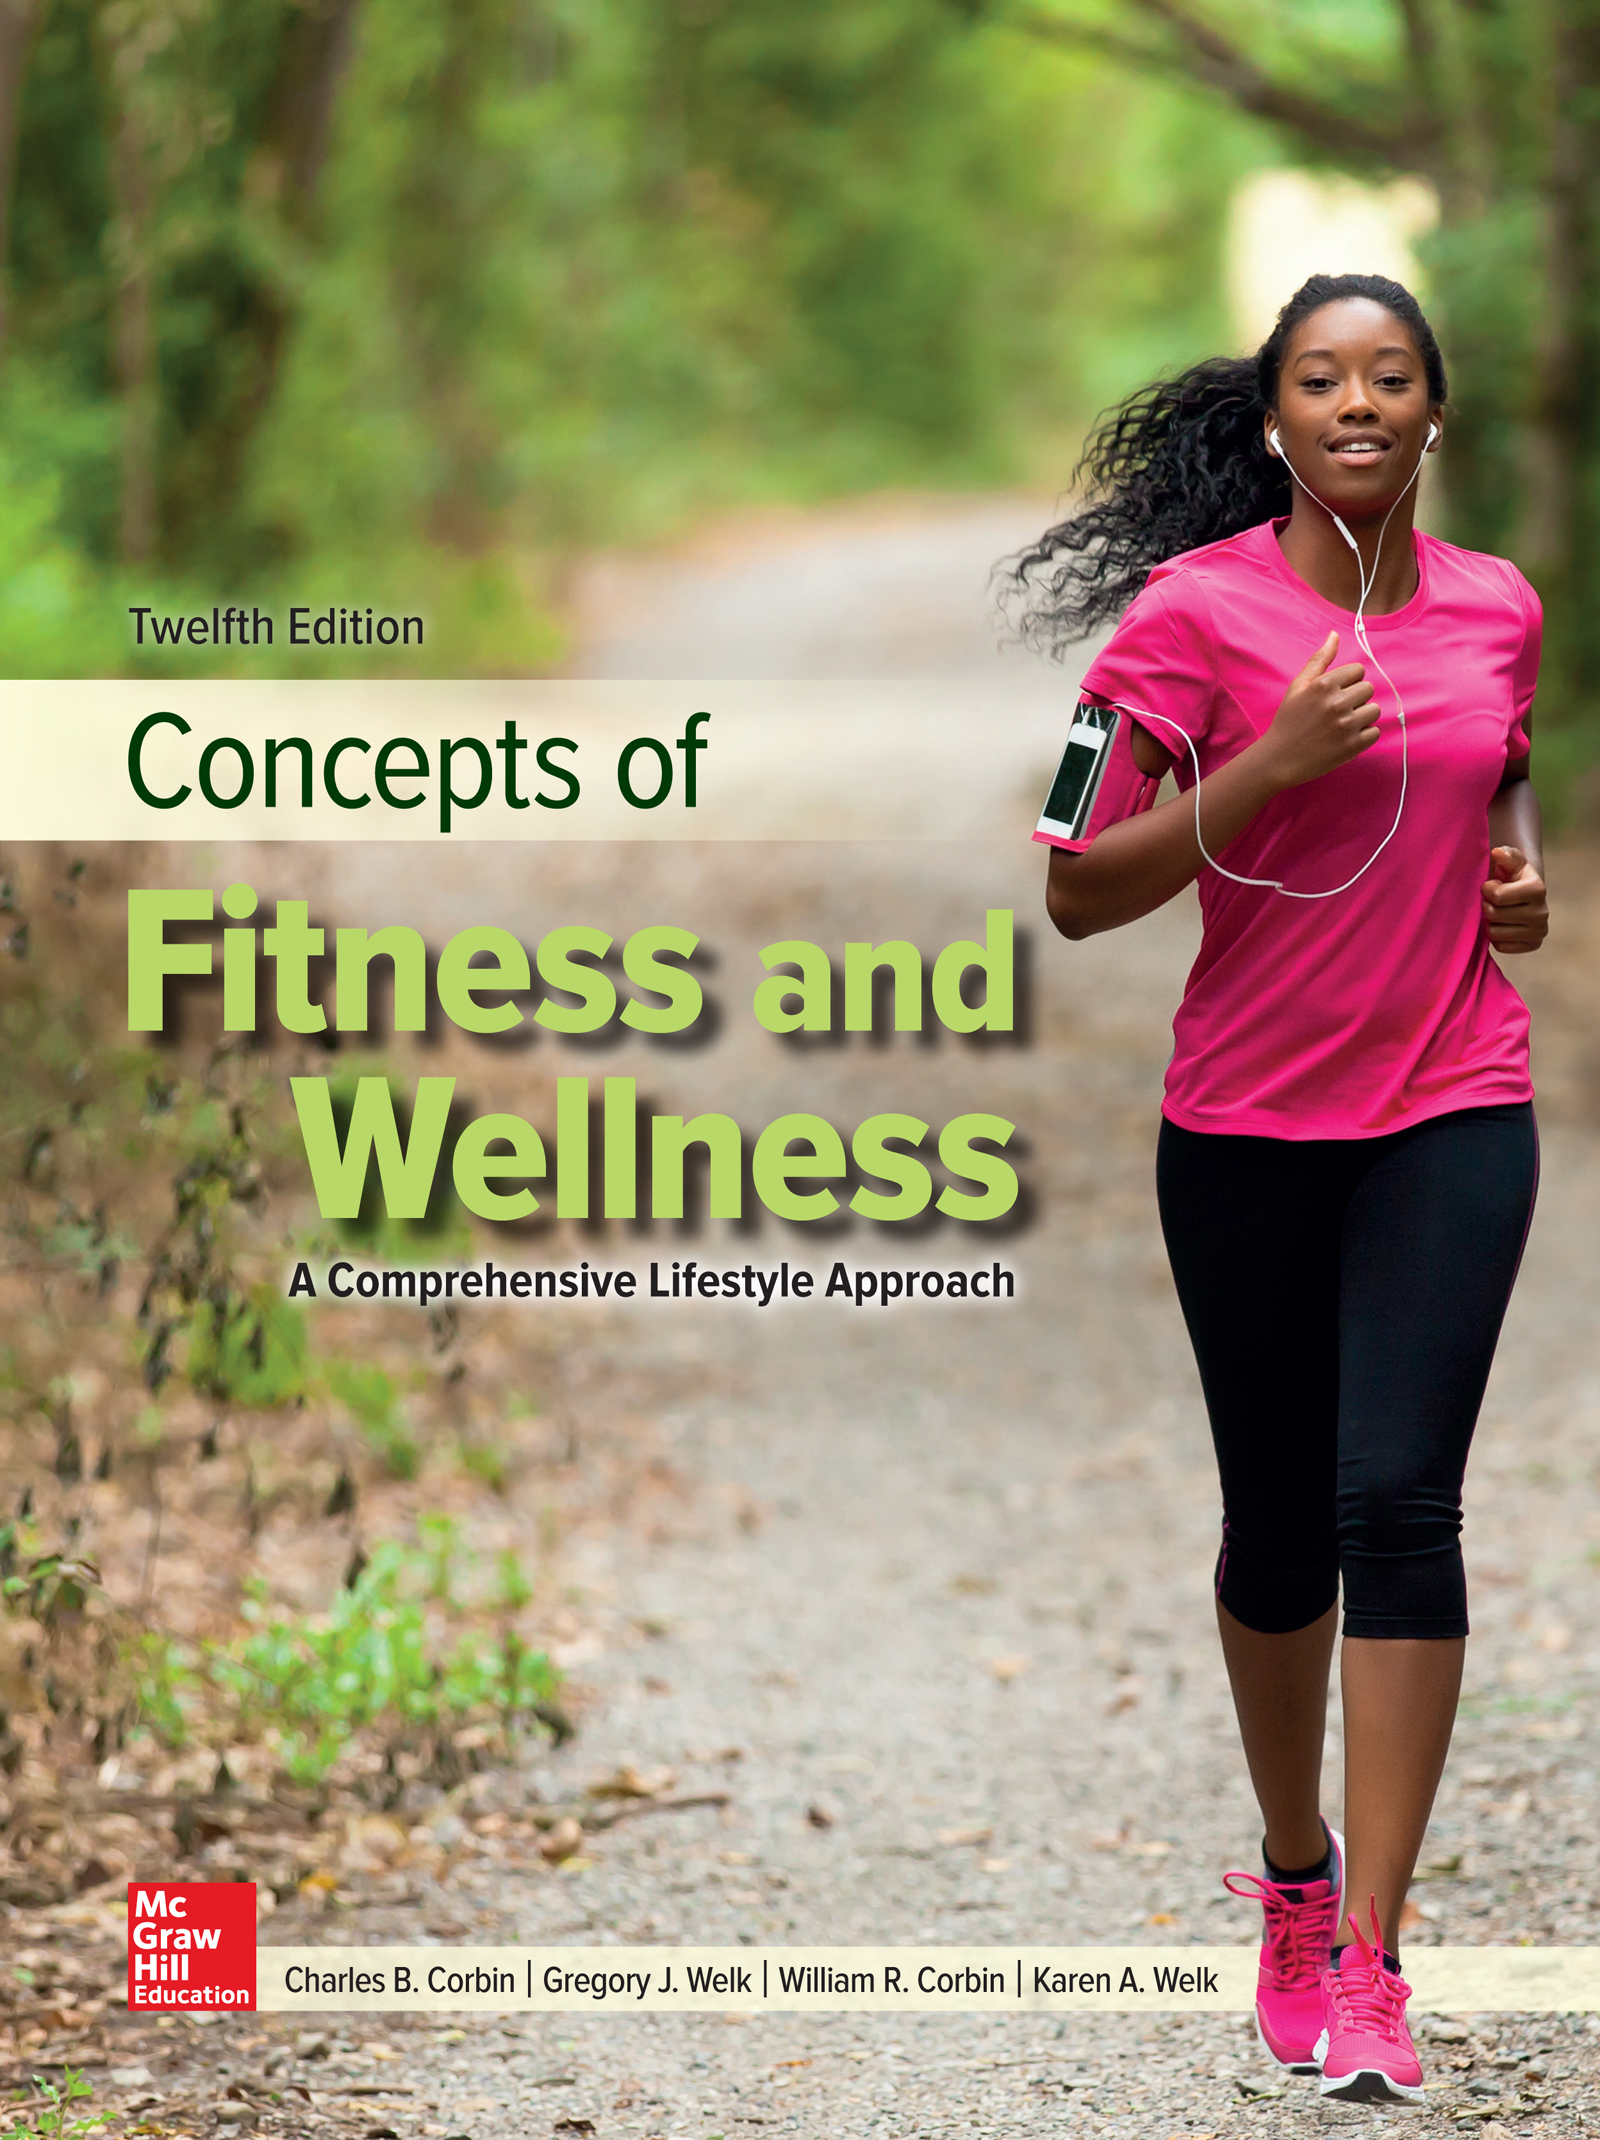 cover of a fitness book featuring a woman running down a pathway